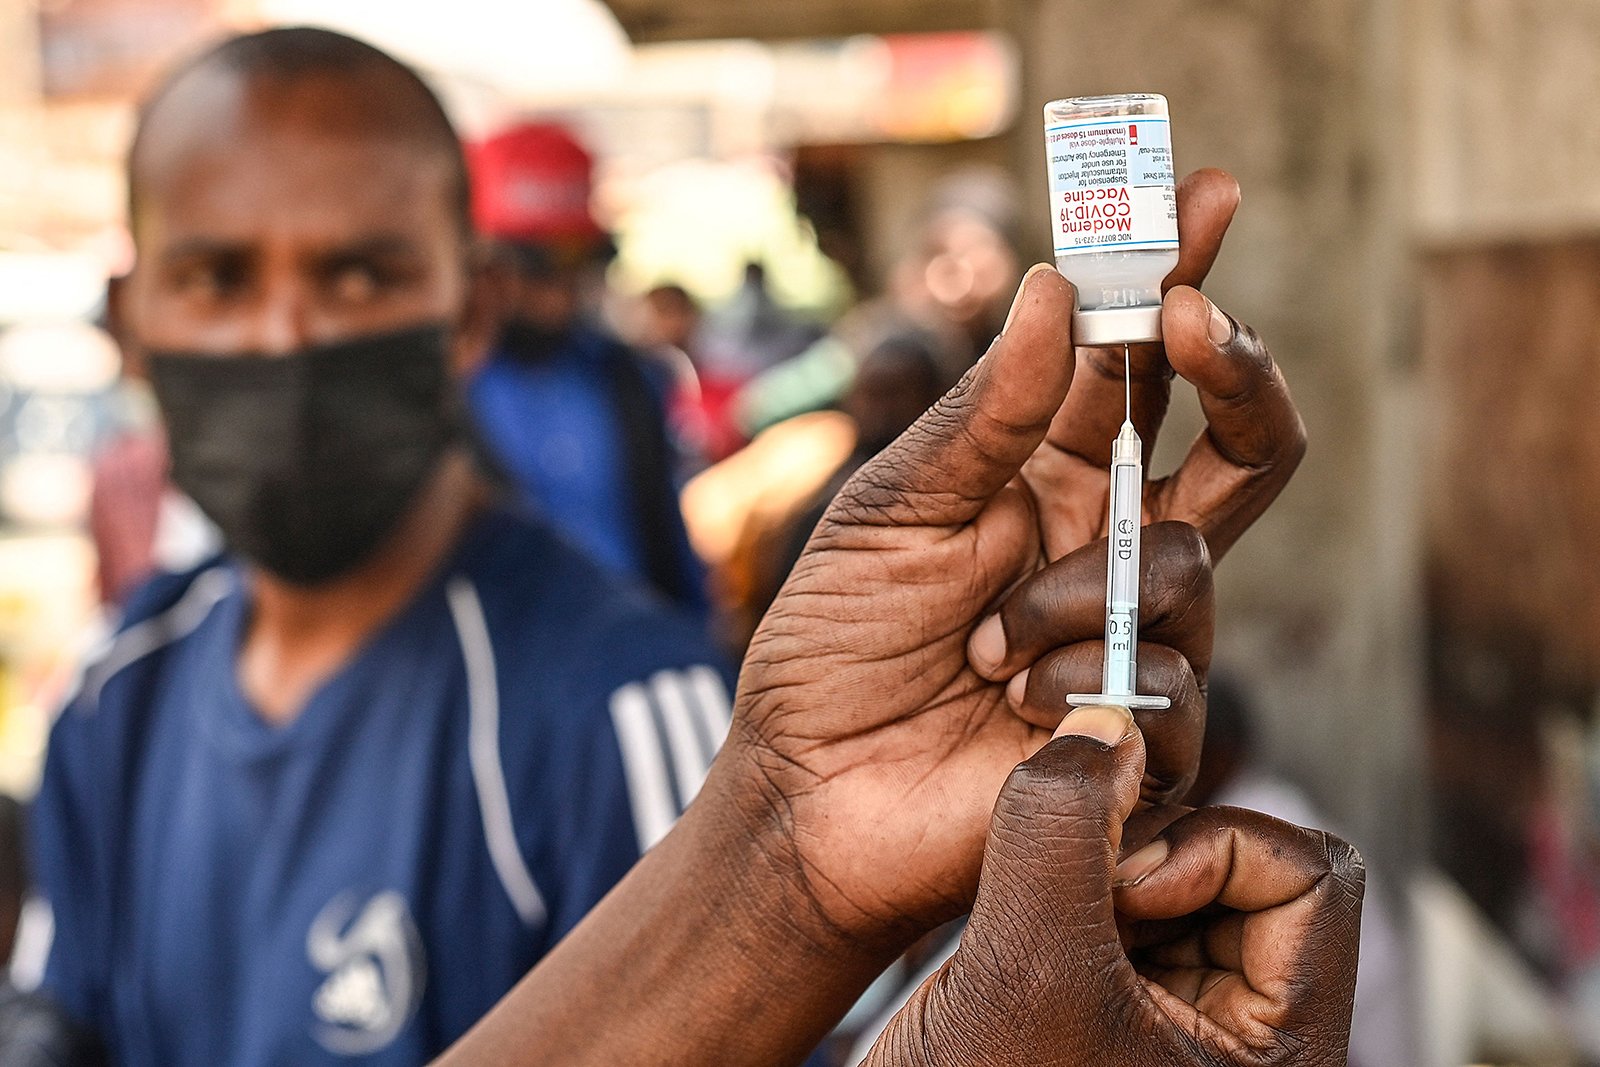 A health official prepares a syringe with the Moderna vaccine prior to administering it during a vaccination drive in Nairobi, Kenya on September 17.